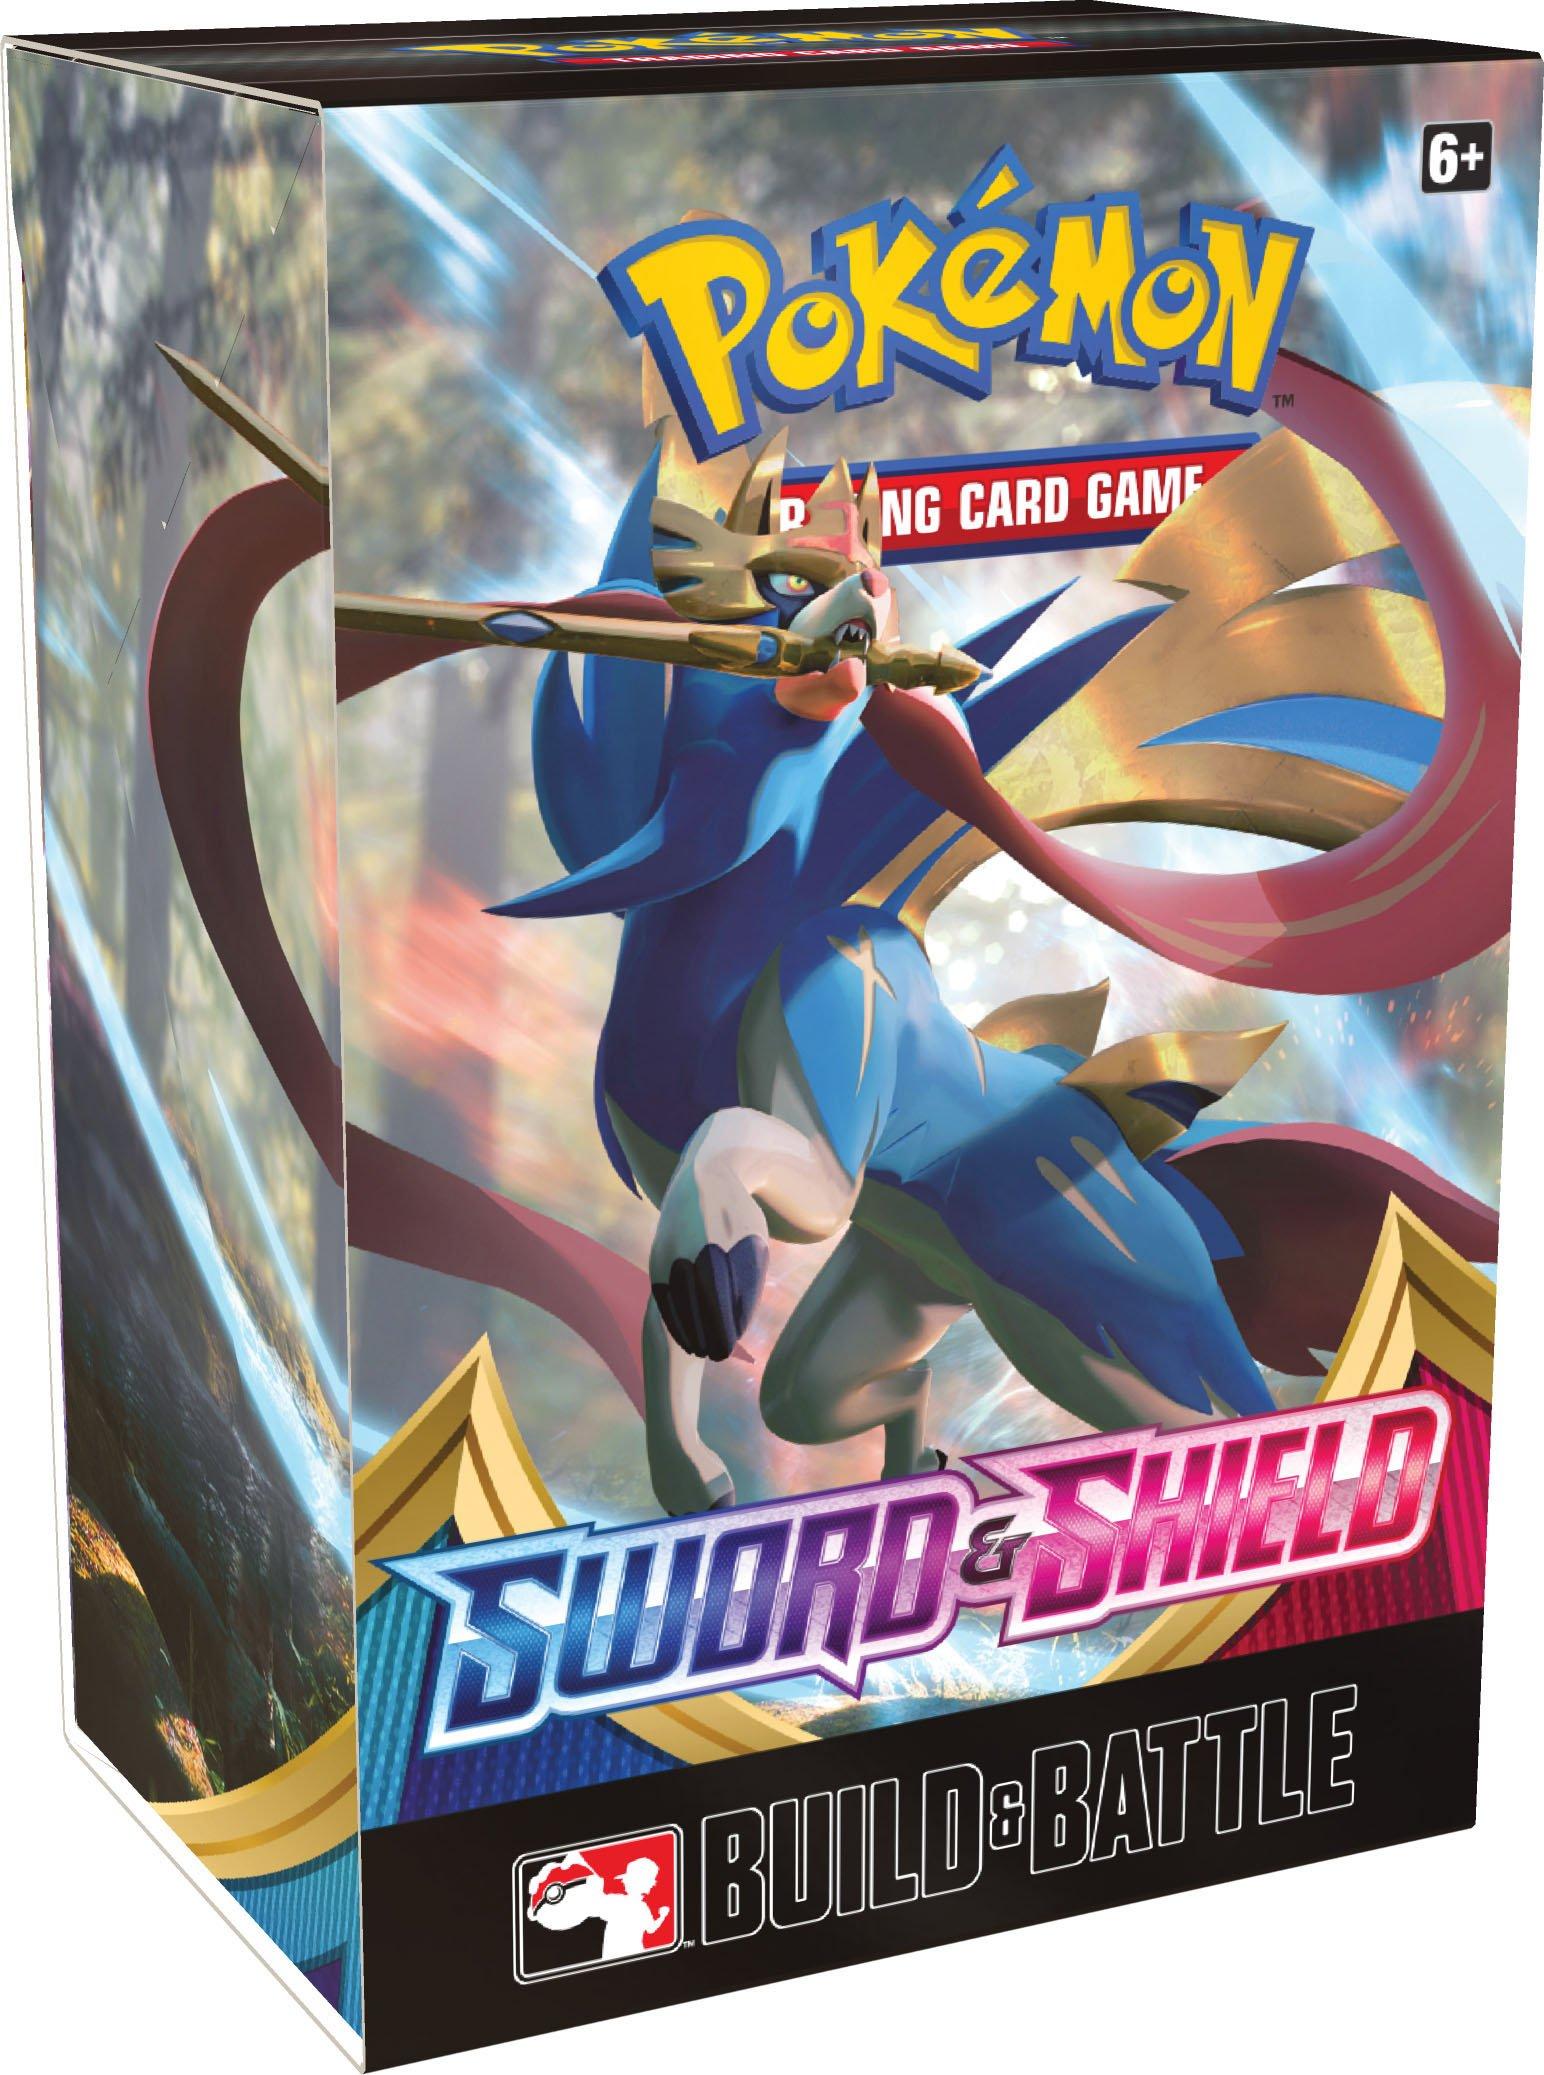 Pokemon Trading Card Game: Sword and Shield Build and Battle Box